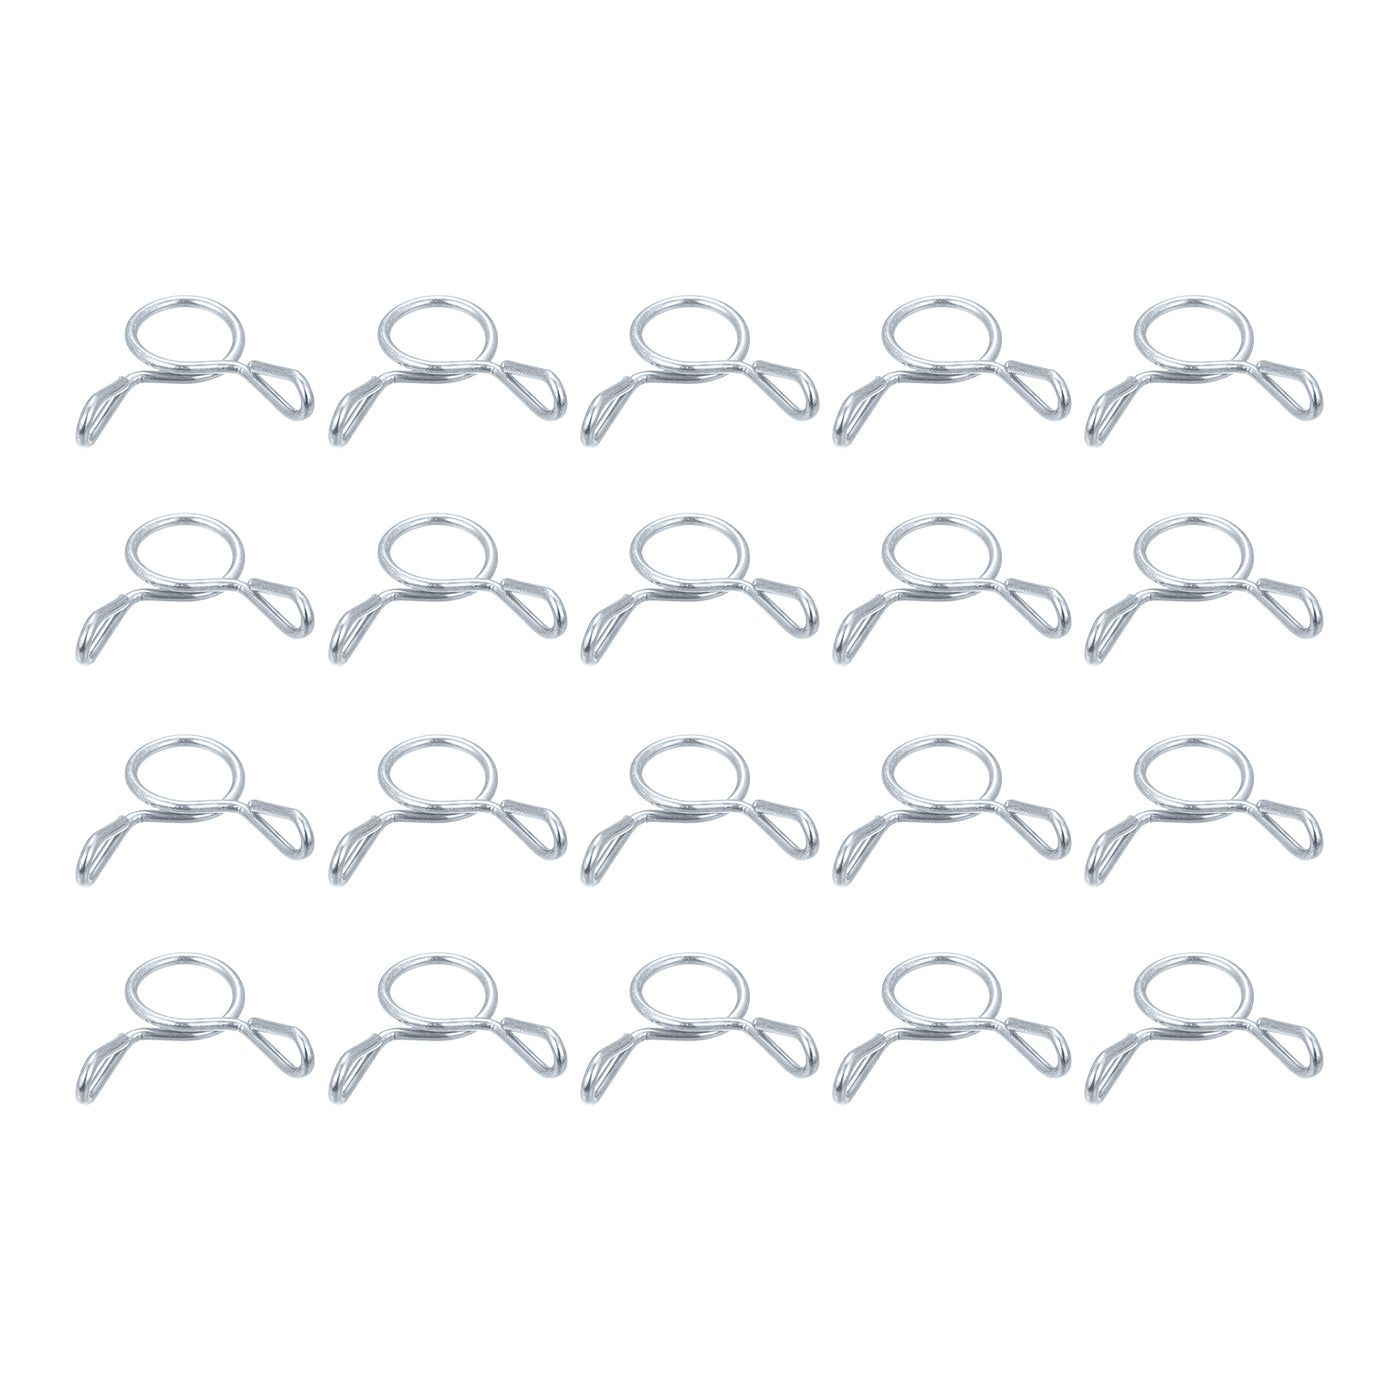 Uxcell Uxcell Fuel Line Hose Clips, 50pcs 13mm 65Mn Steel Tubing Spring Clamps (Silver)